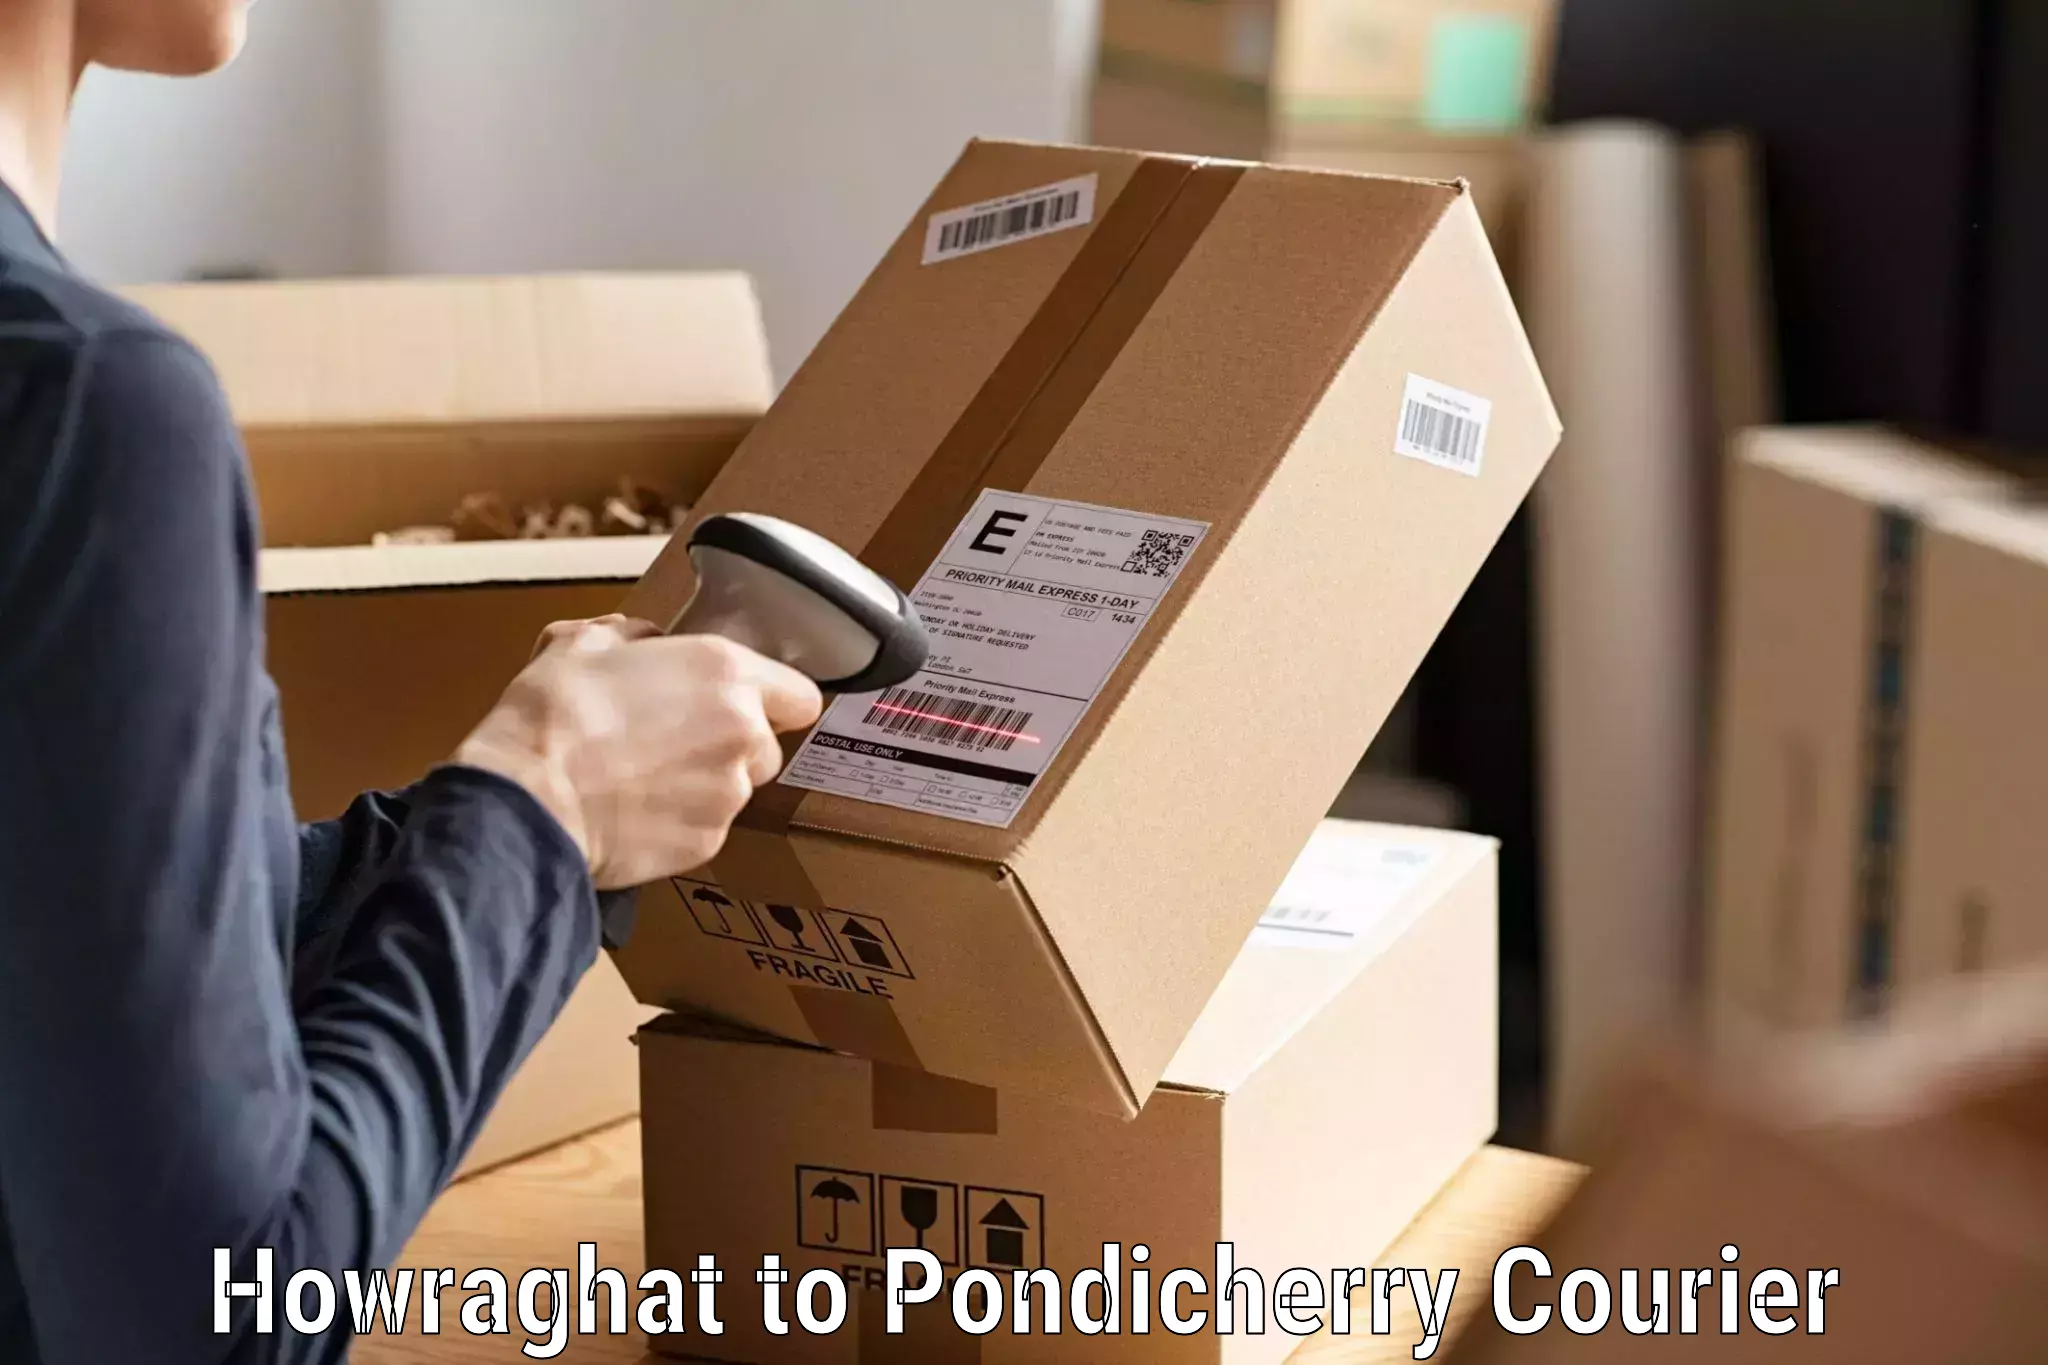 Smart parcel tracking Howraghat to Pondicherry